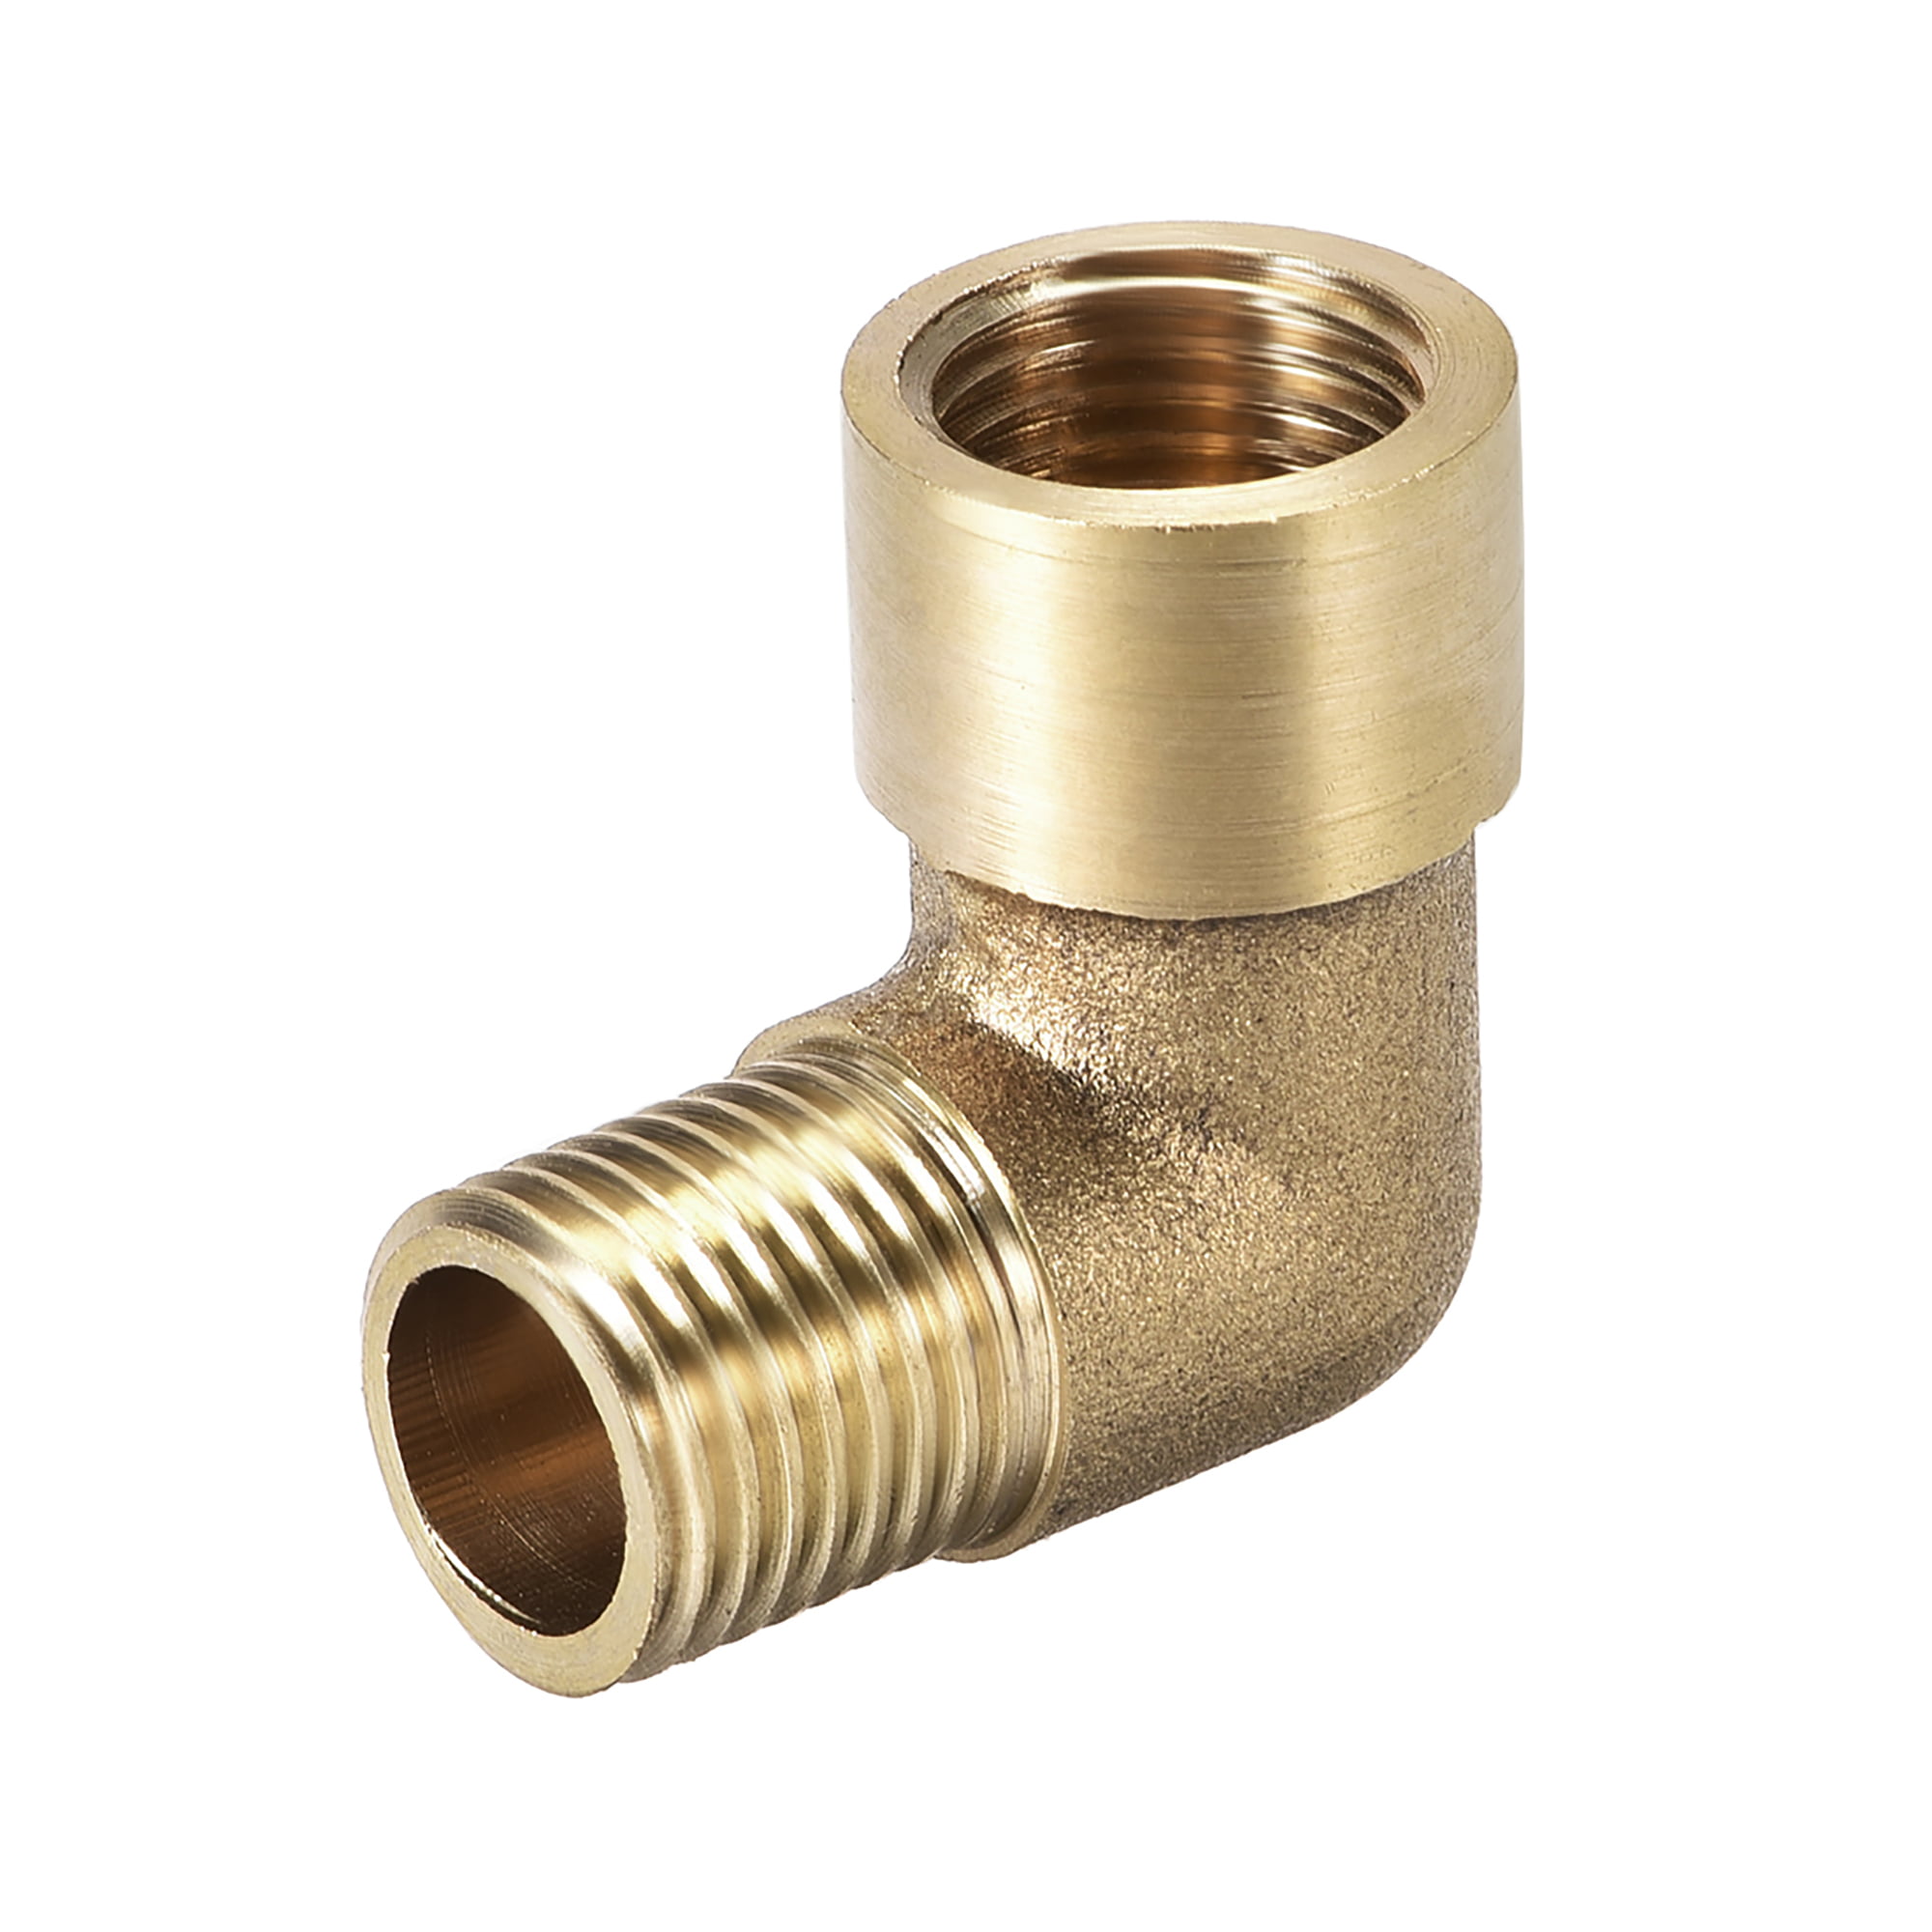 DN15 1/2" BSP Brass Pipe Fitting 90° Elbow Extension Male/Female Thread Fittings